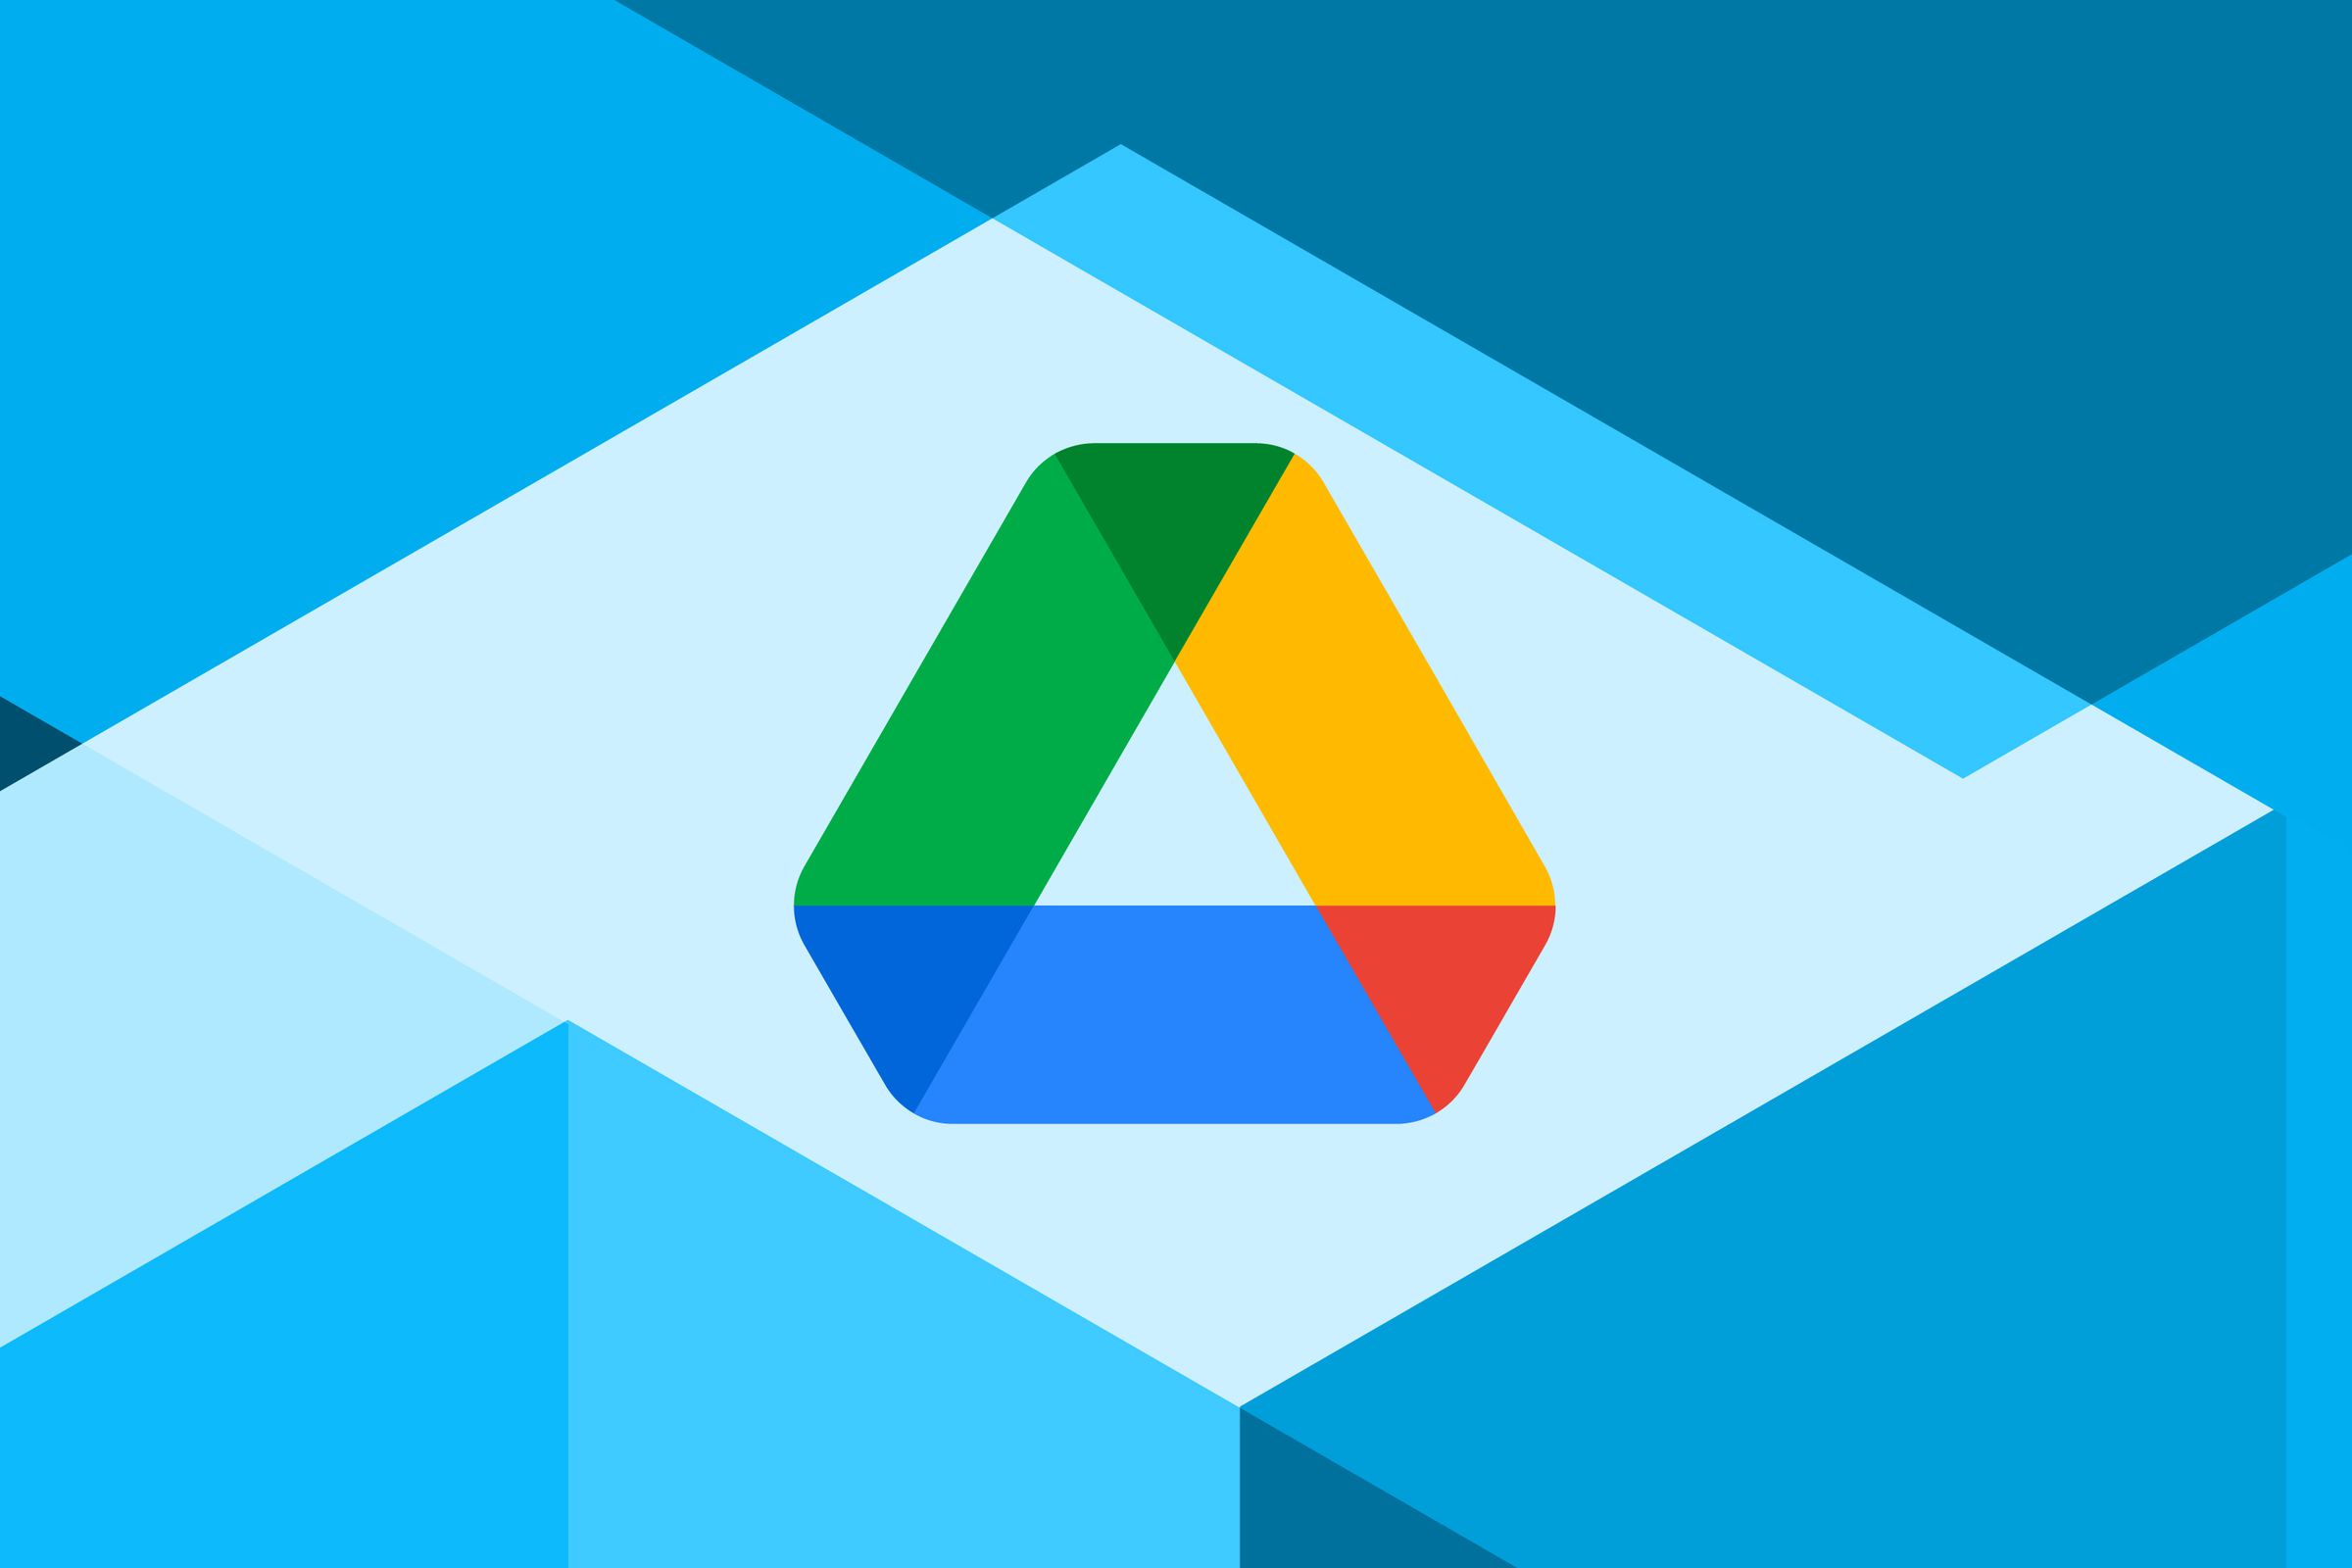 The Google Drive logo on a background of geometric shapes in various shades of blue.